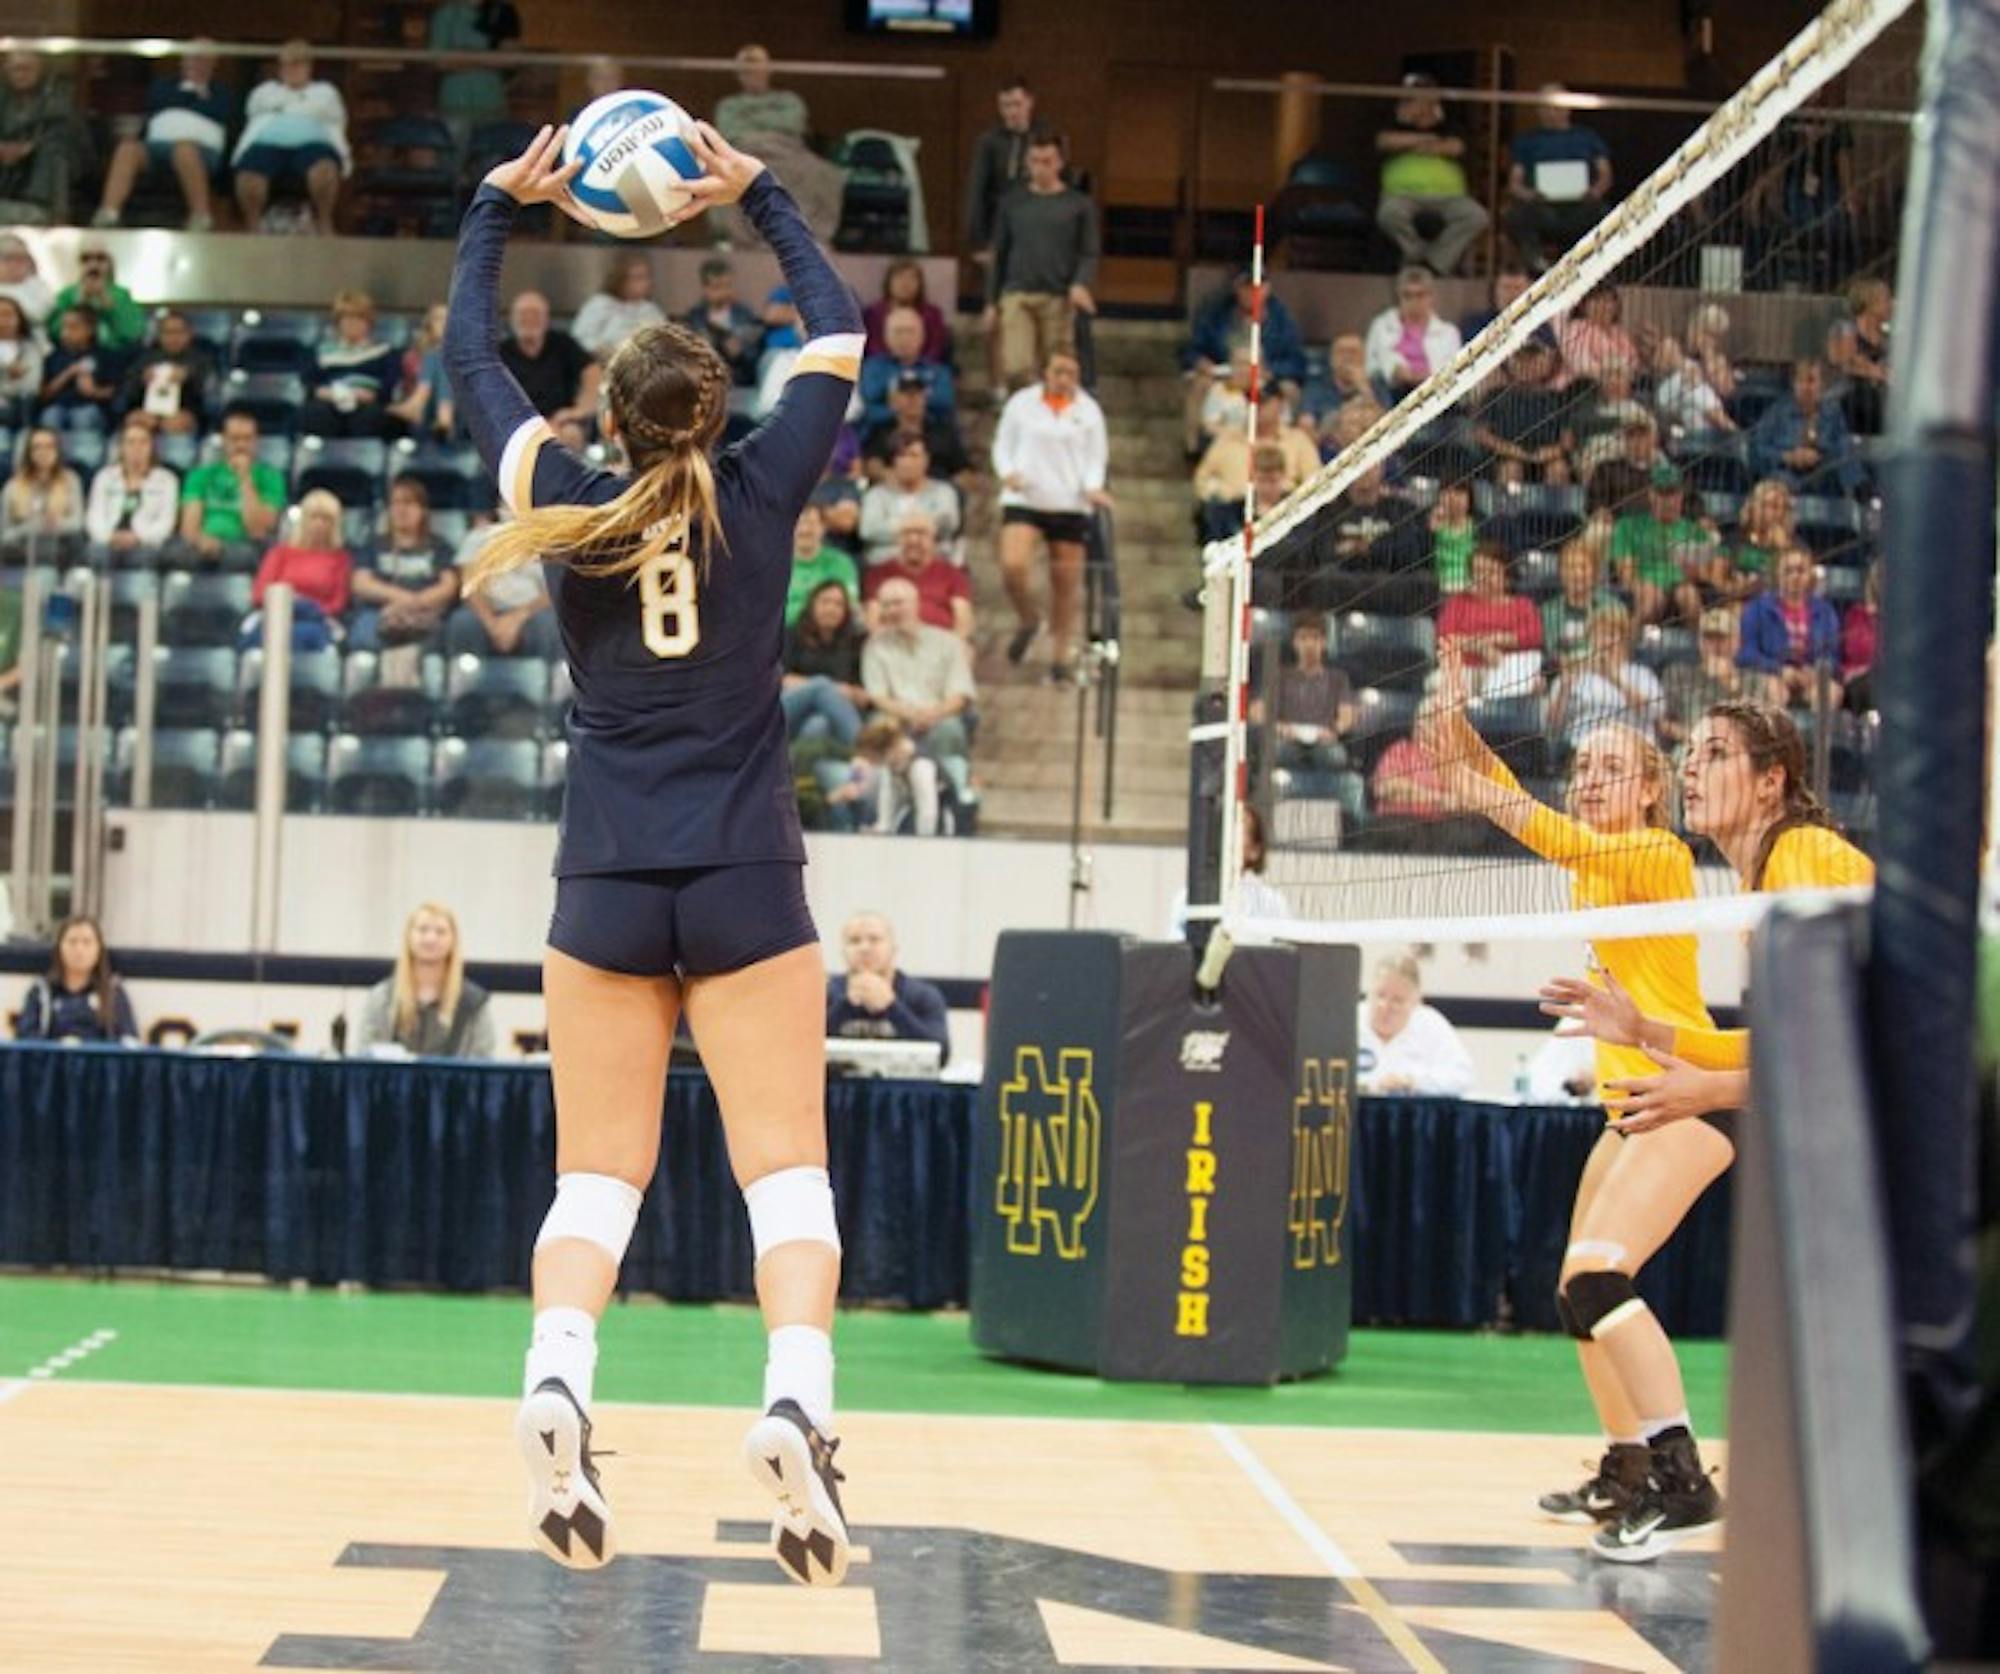 Irish senior setter Caroline Holt sets the ball during Notre Dame’s 3-1 win over Valparaiso on Aug. 25 at Compton Family Ice Arena. Holt tallied 49 assists during the match.